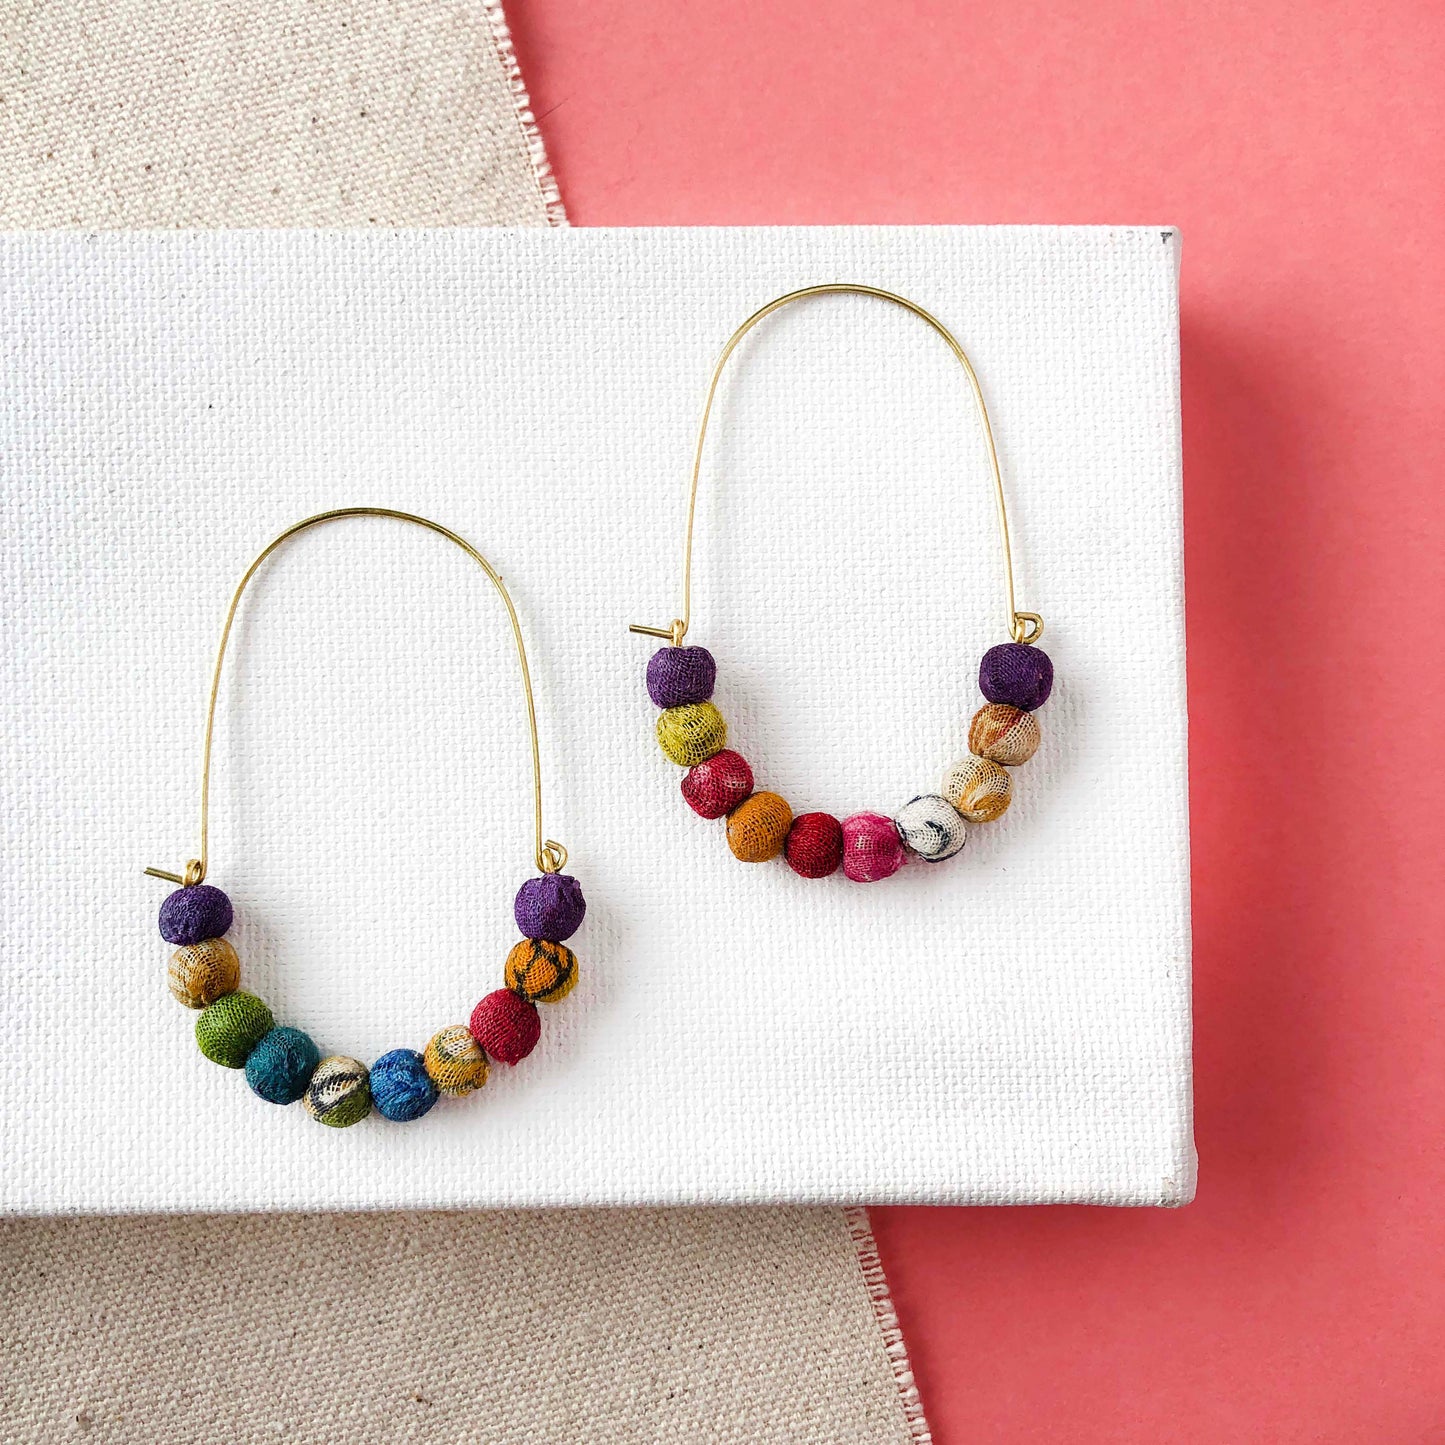 How To Make Earrings and Pendants Using Beading Hoops - Jewelry